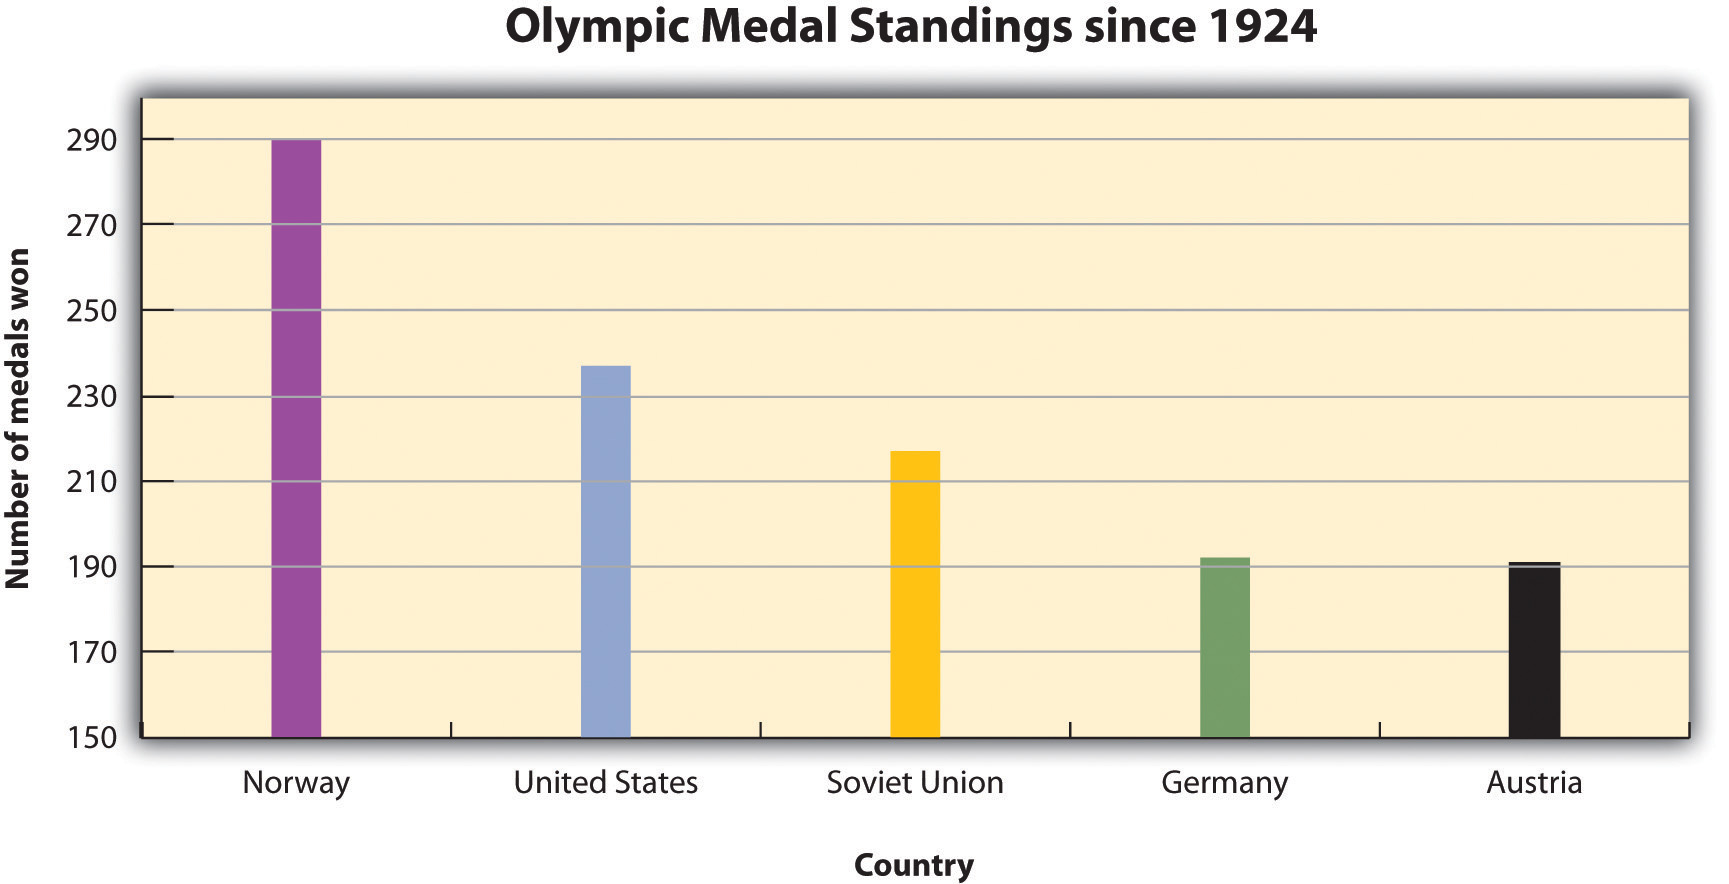 Olympic Medal Standings since 1924 show that Norway has won the most, followed by the United States, Soviet Union, Germany, and Austria